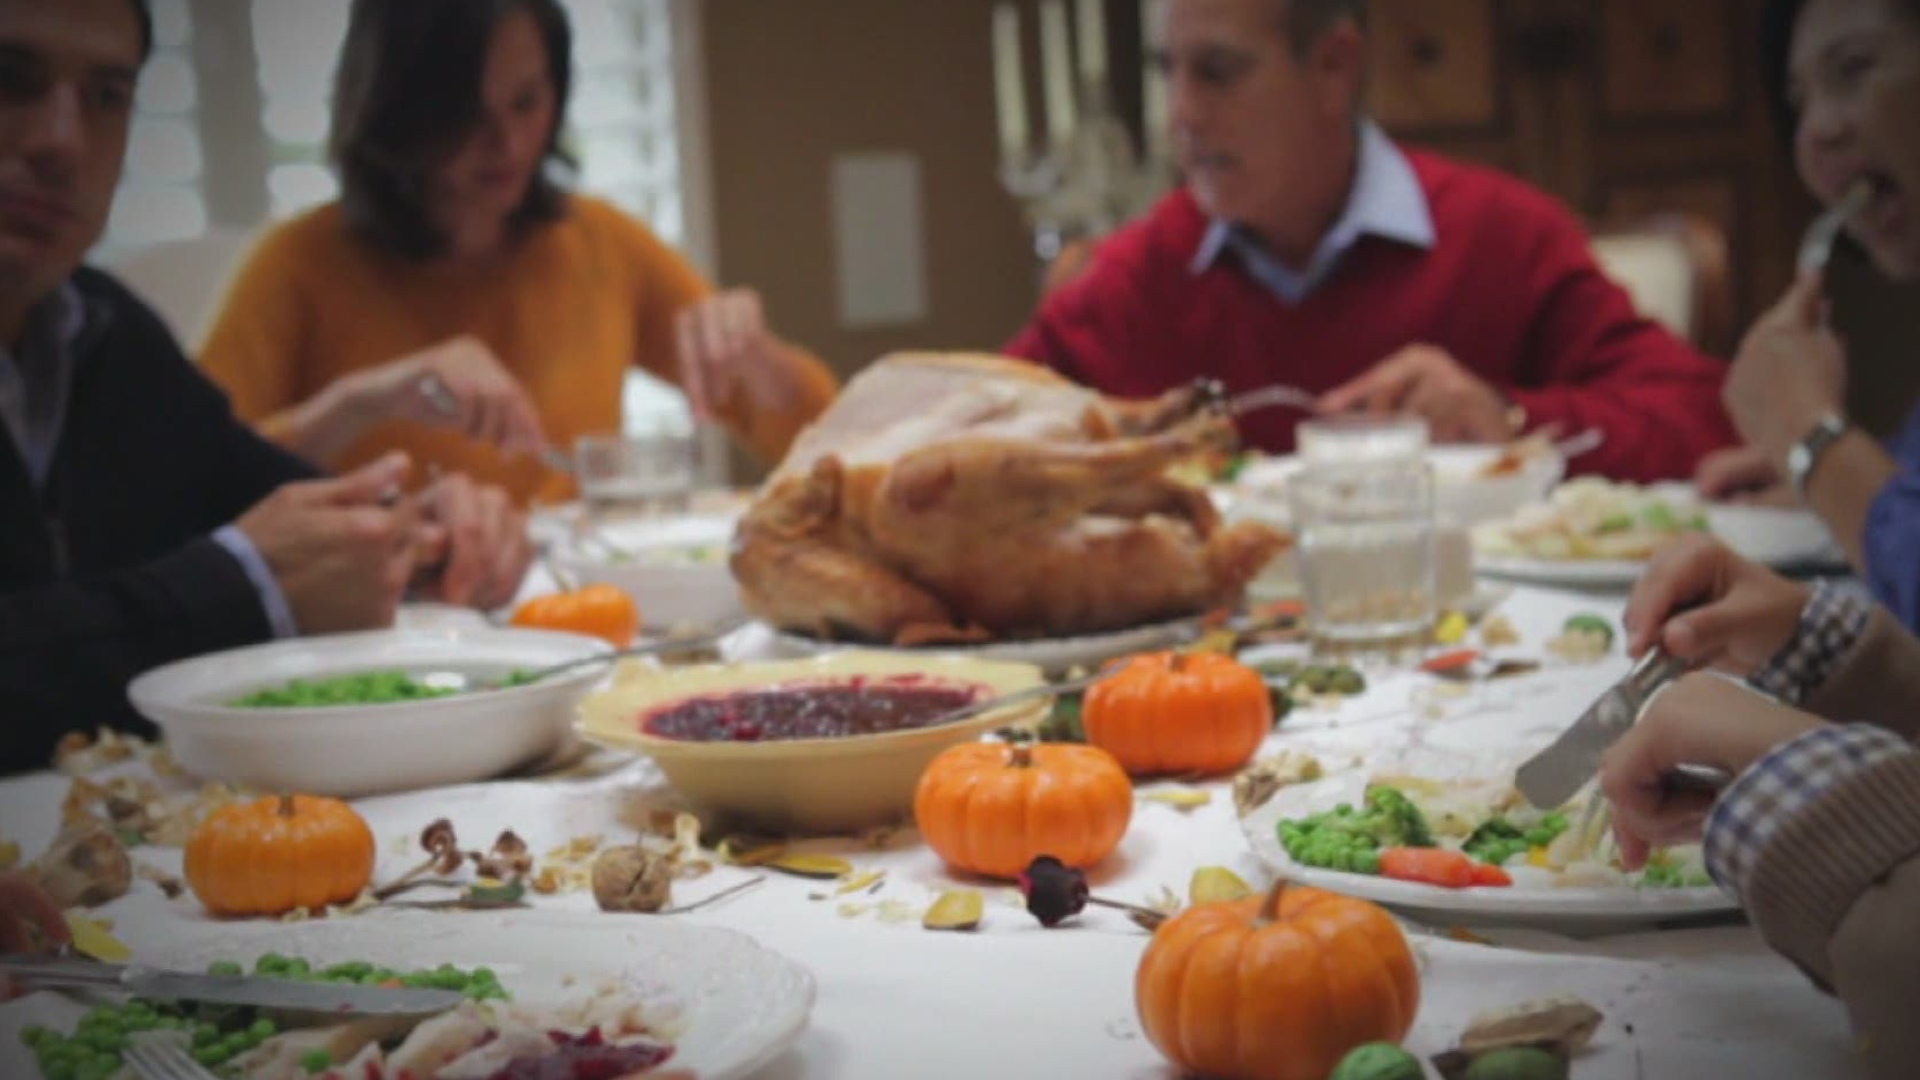 As we get closer to Thanksgiving, health experts hope you sit this one out at home.